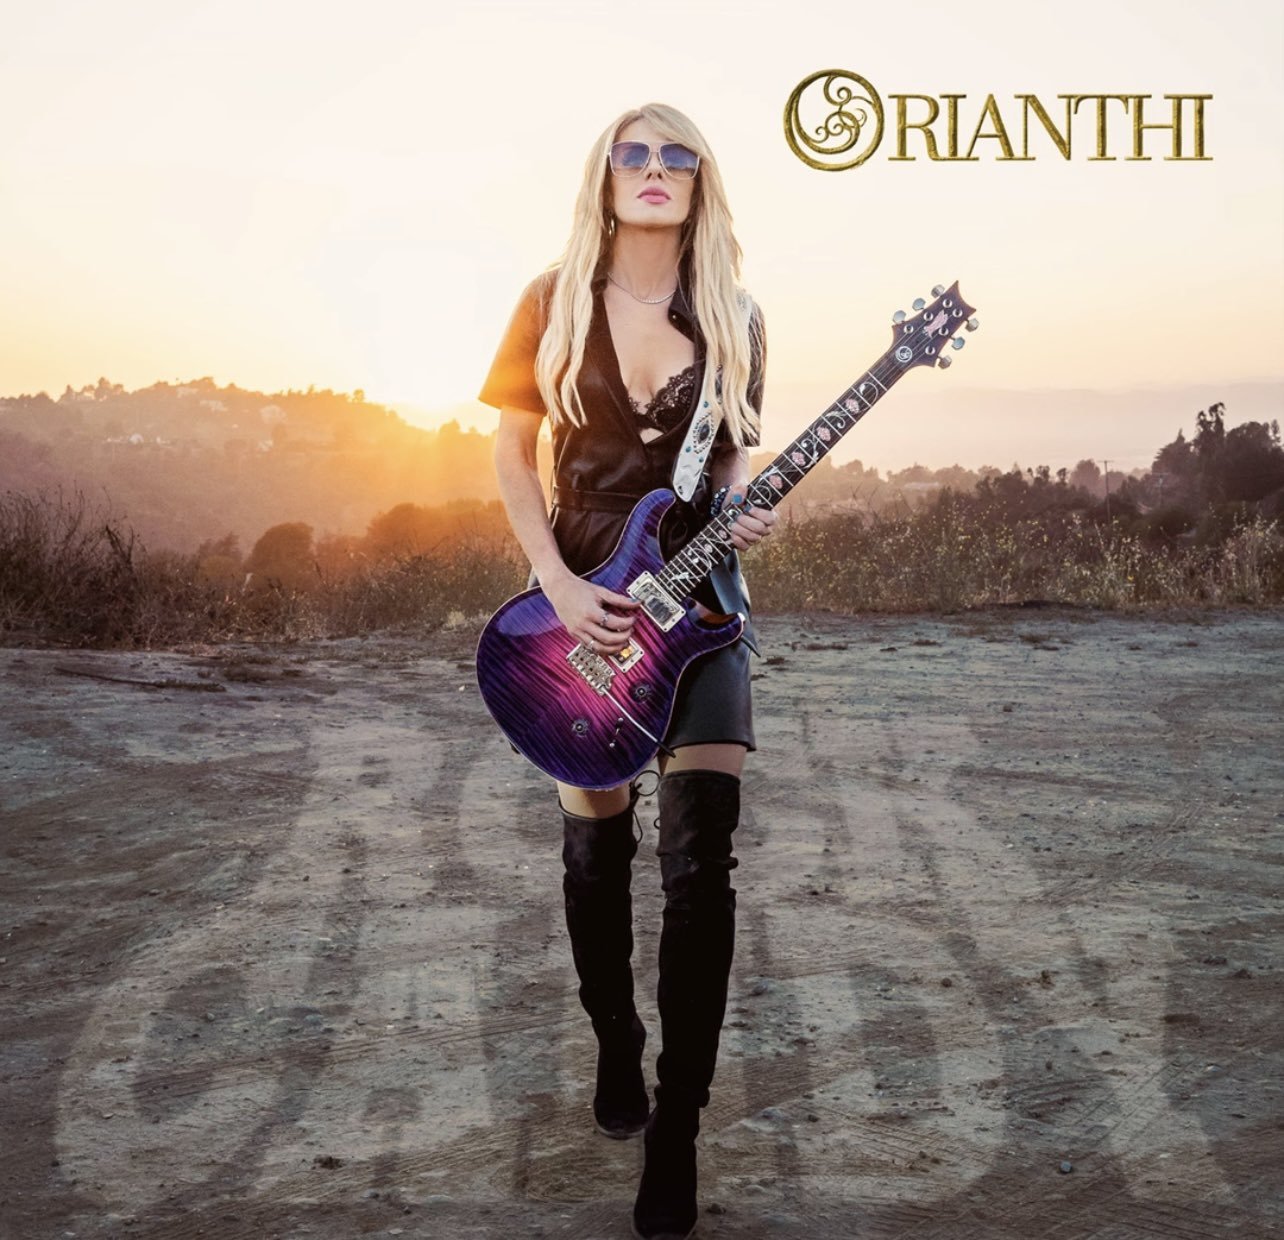 Cover of Orianthi's "Rock Candy" album; a woman walks toward the camera holding an electric guitar at sunset.